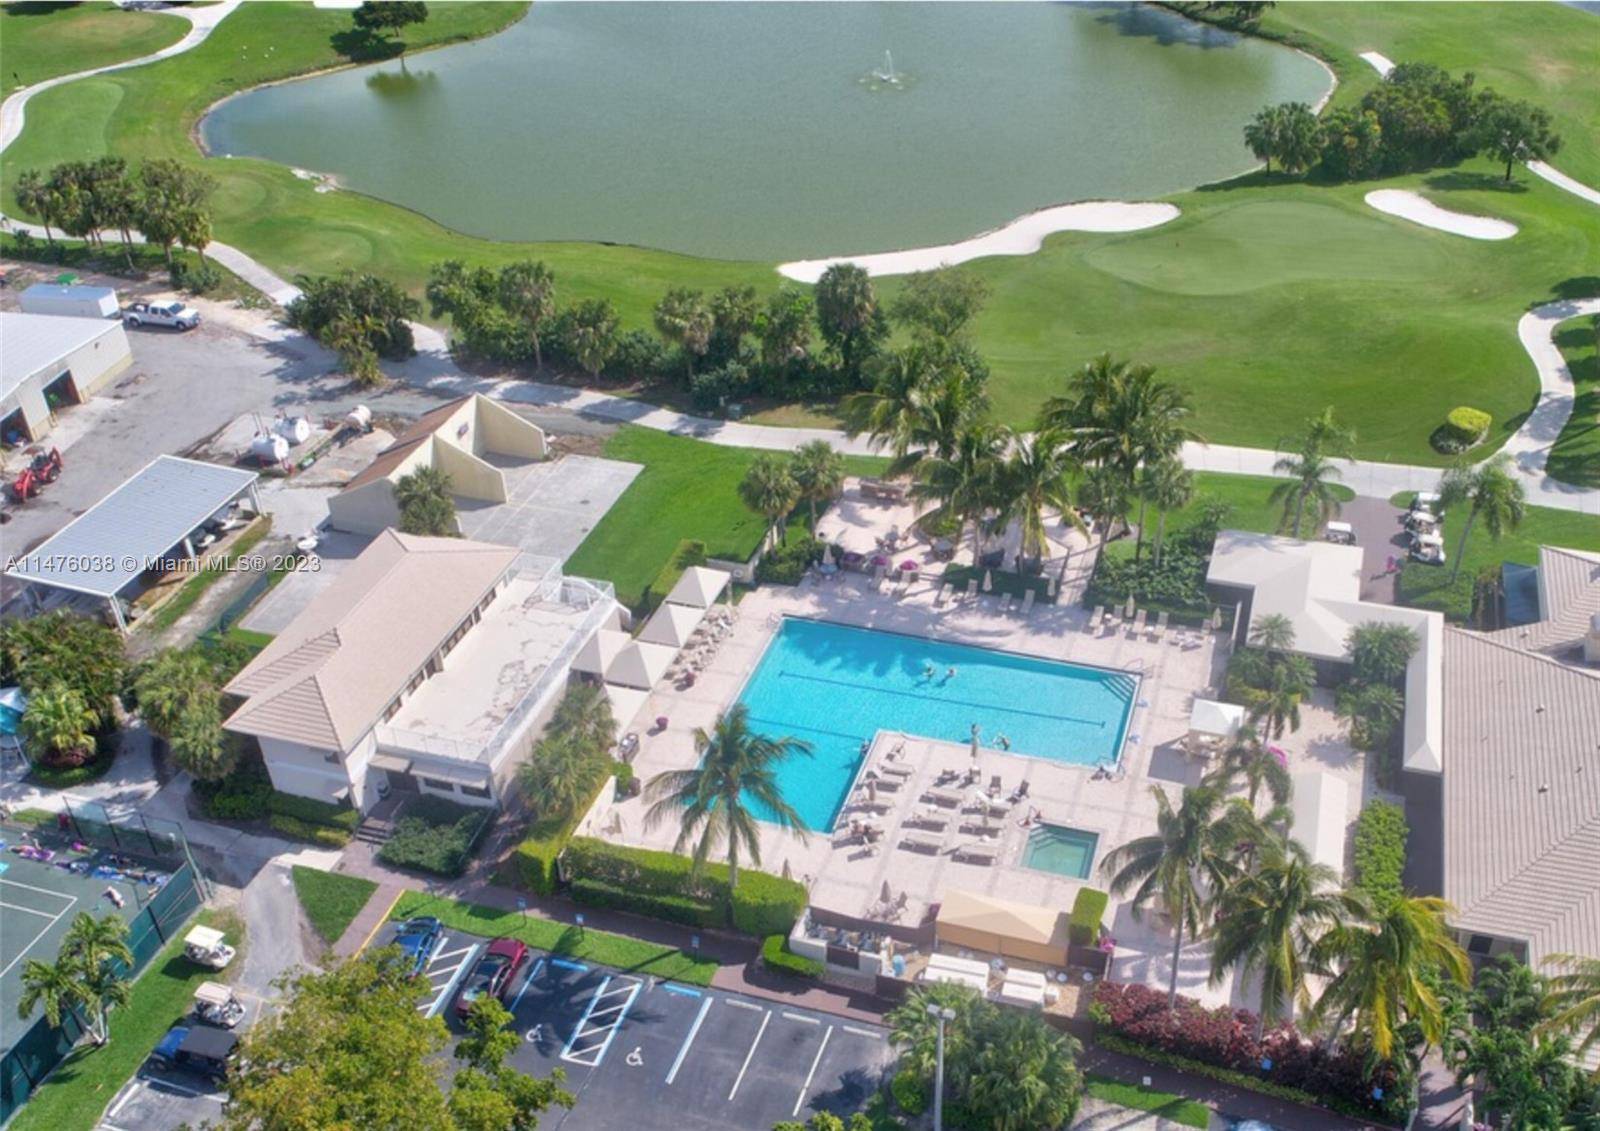 Fantastic 2 bedroom 2 bath END unit FURNISHED condo perfectly situated on the golf coarse in Indian Springs.